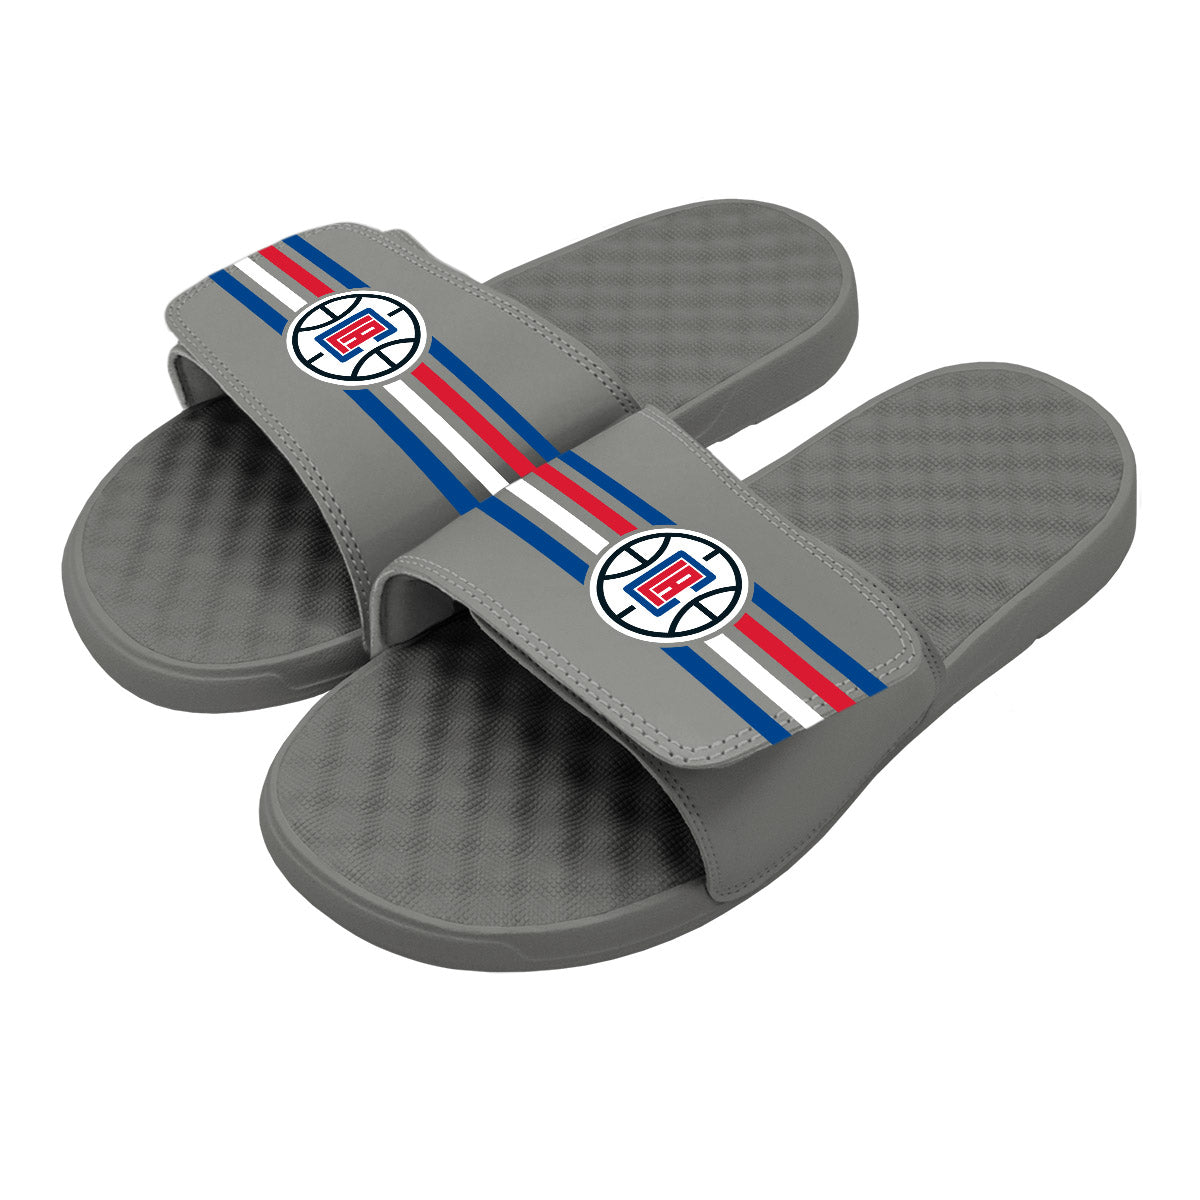 Los Angeles Clippers Stripes Slides